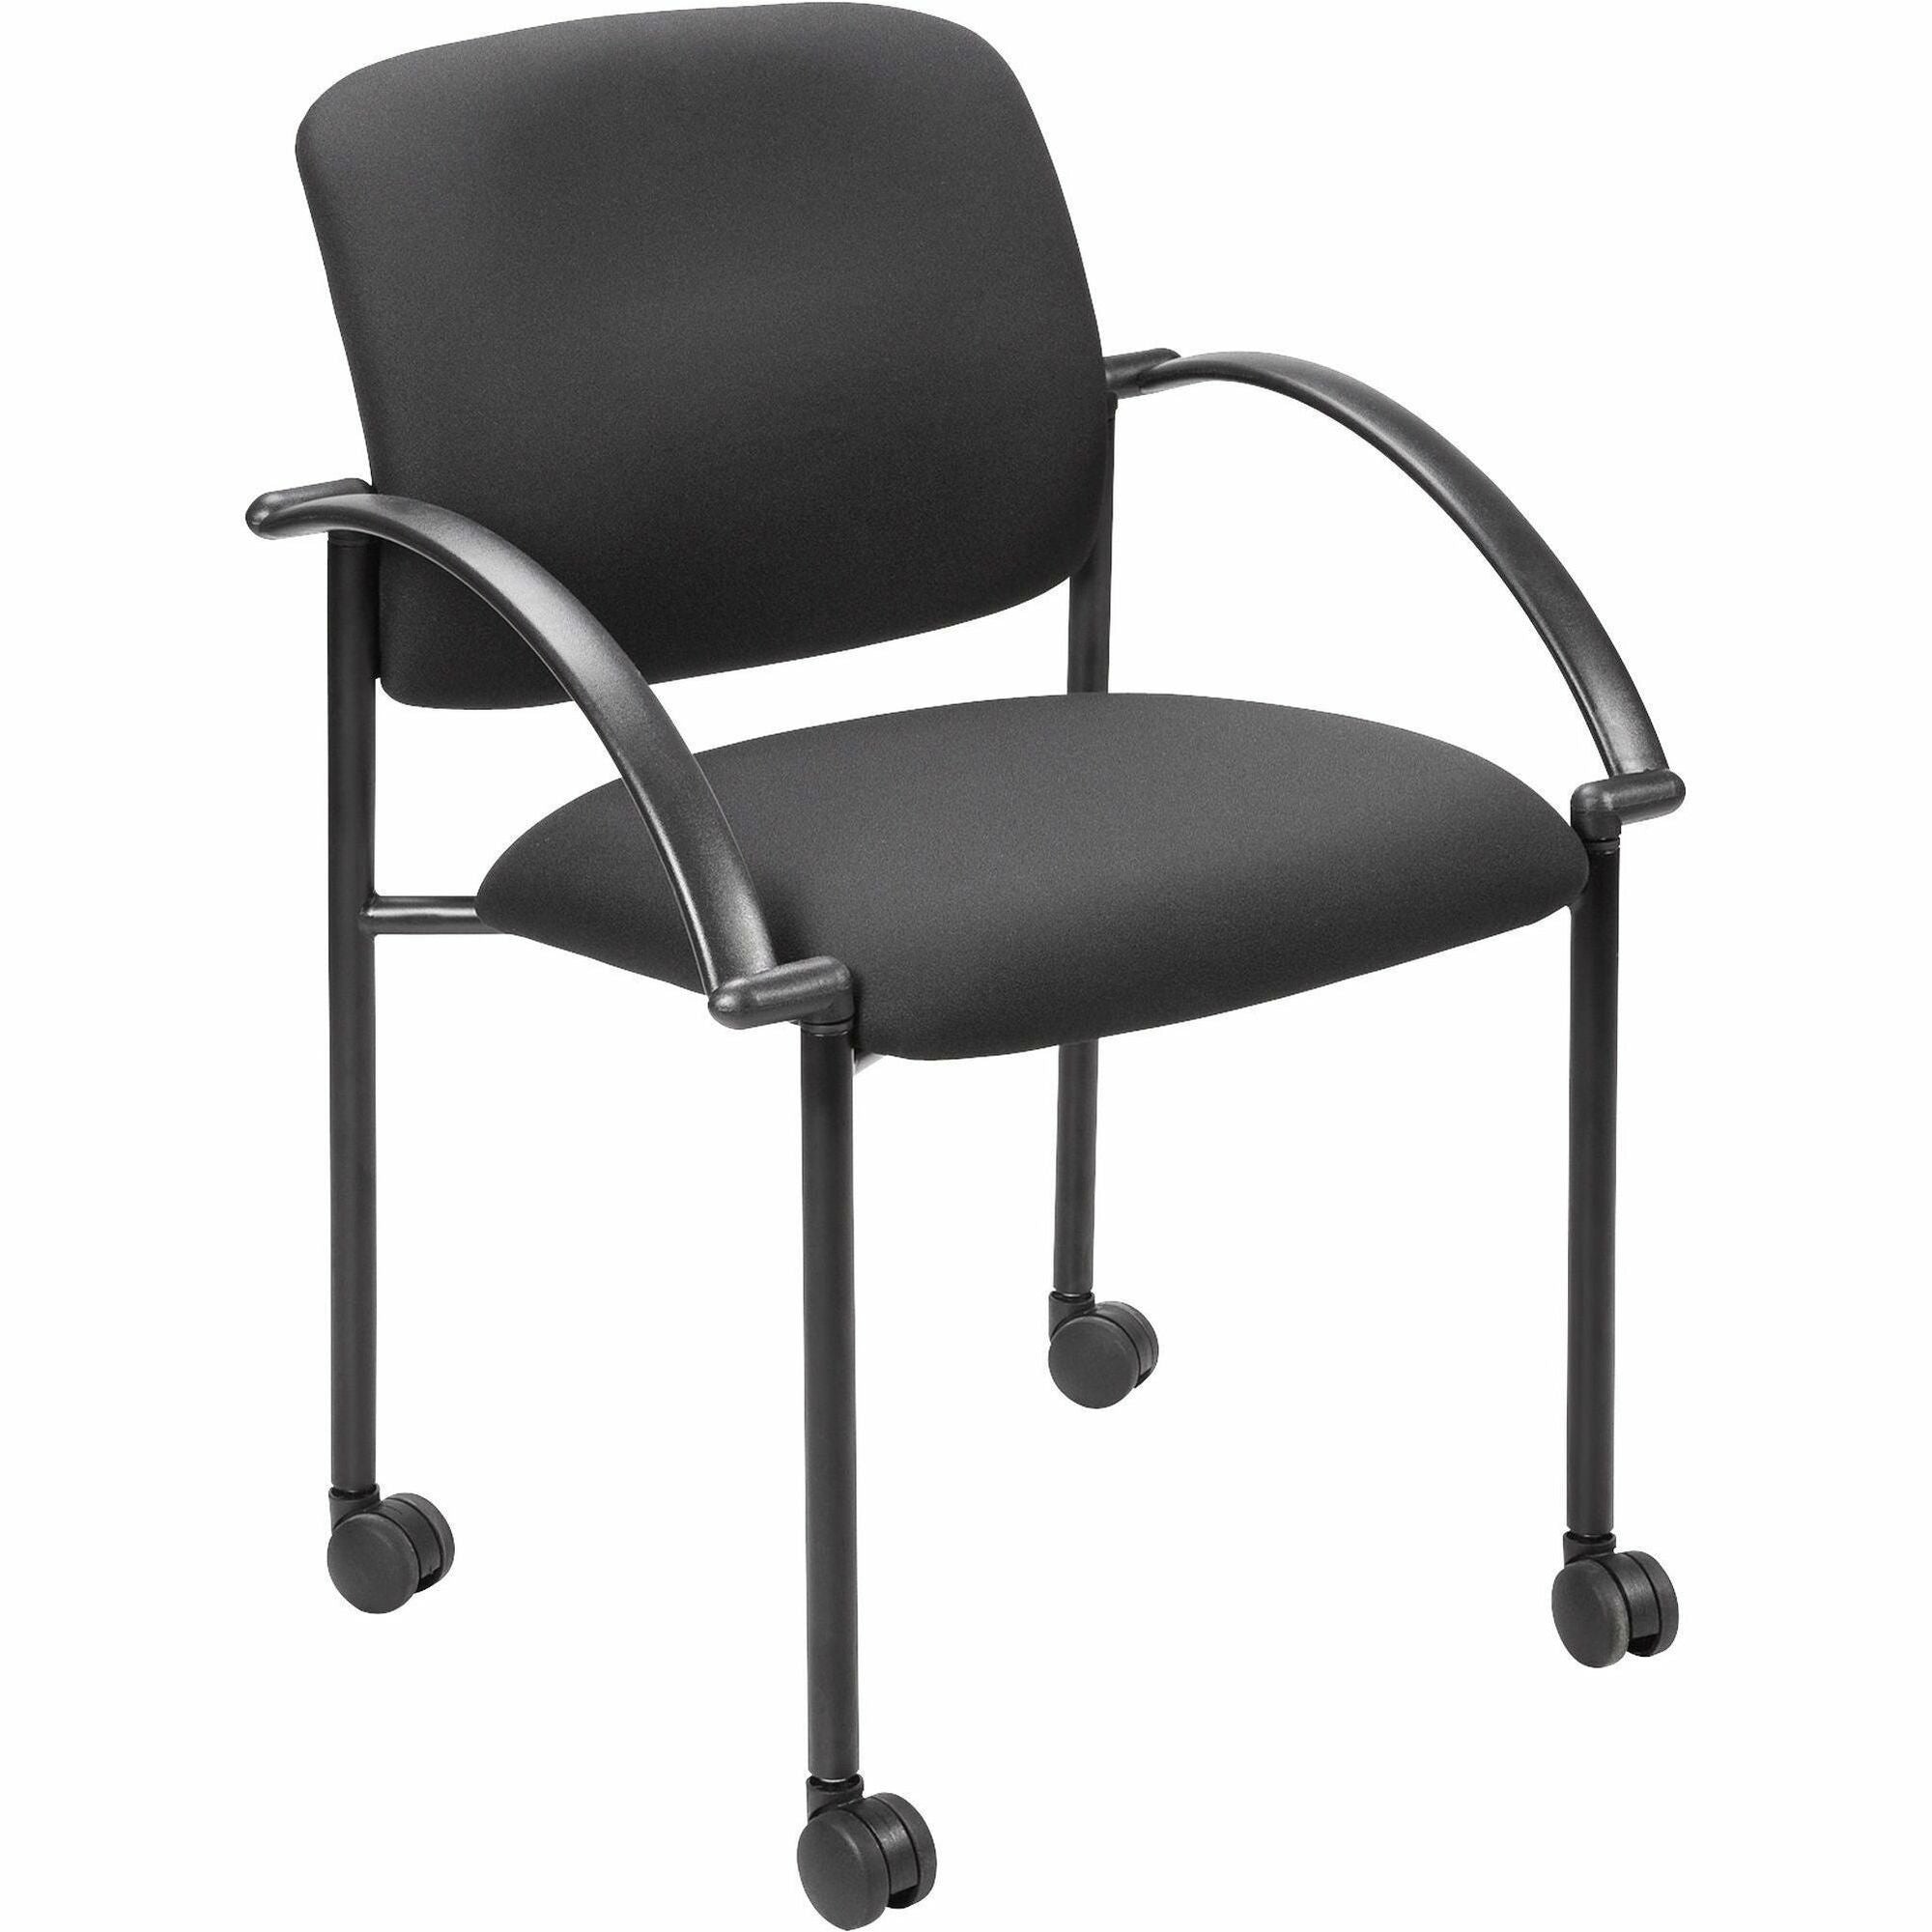 Lorell Upholstered Guest Chair with Arms - Black Seat - Black Steel Frame - Four-legged Base - Black - Armrest - 2 / Carton - 